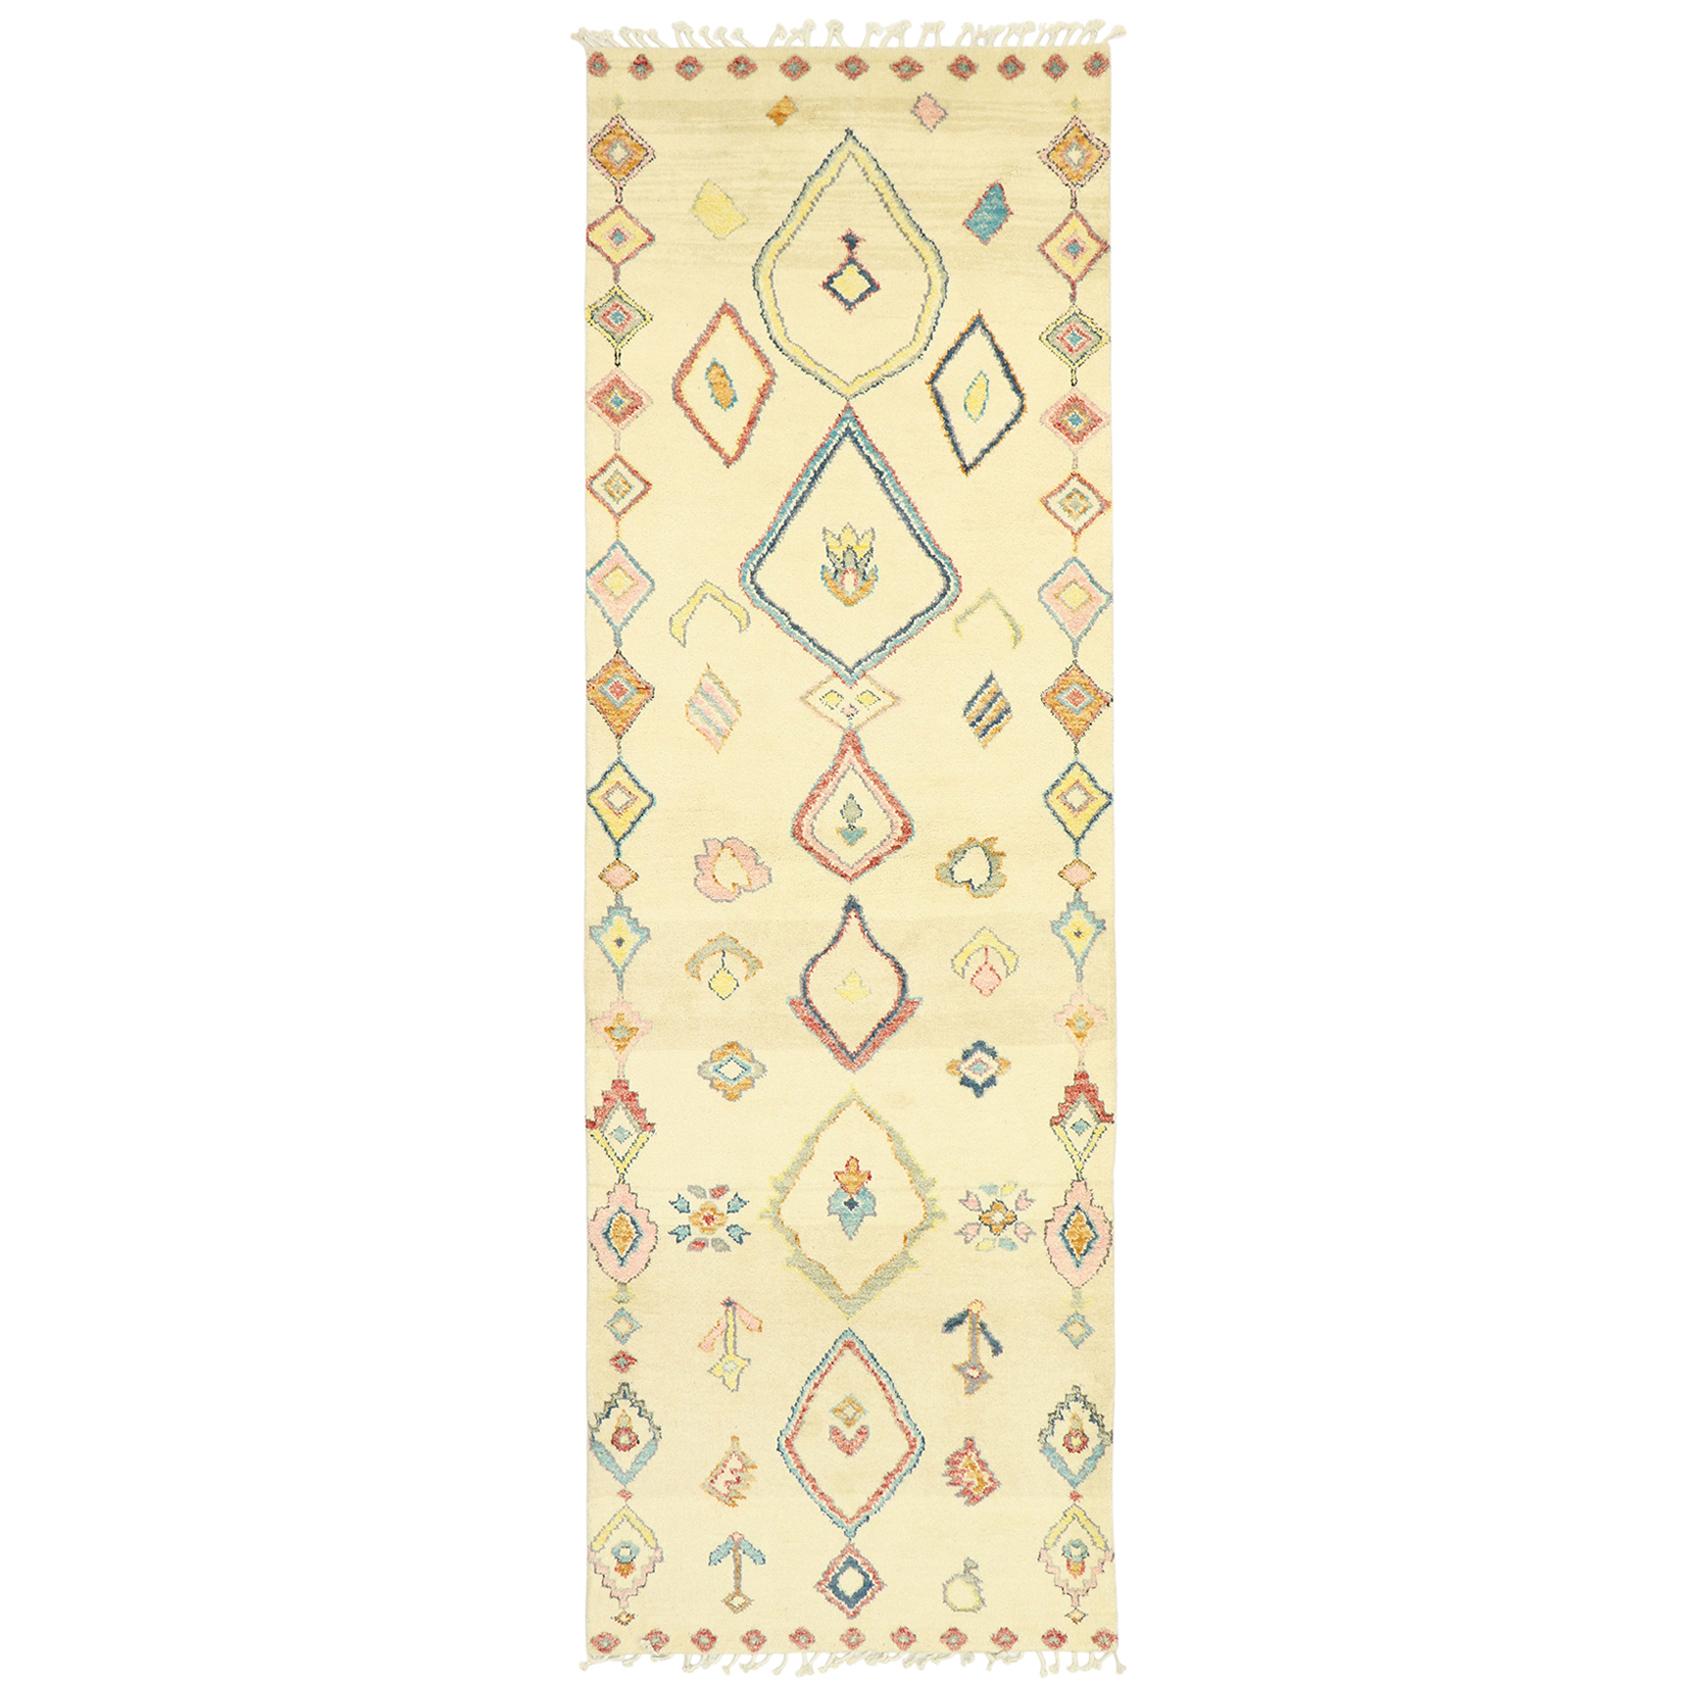 Colorful Moroccan Rug Runner, Cozy Boho Meets Eclectic Jungalow